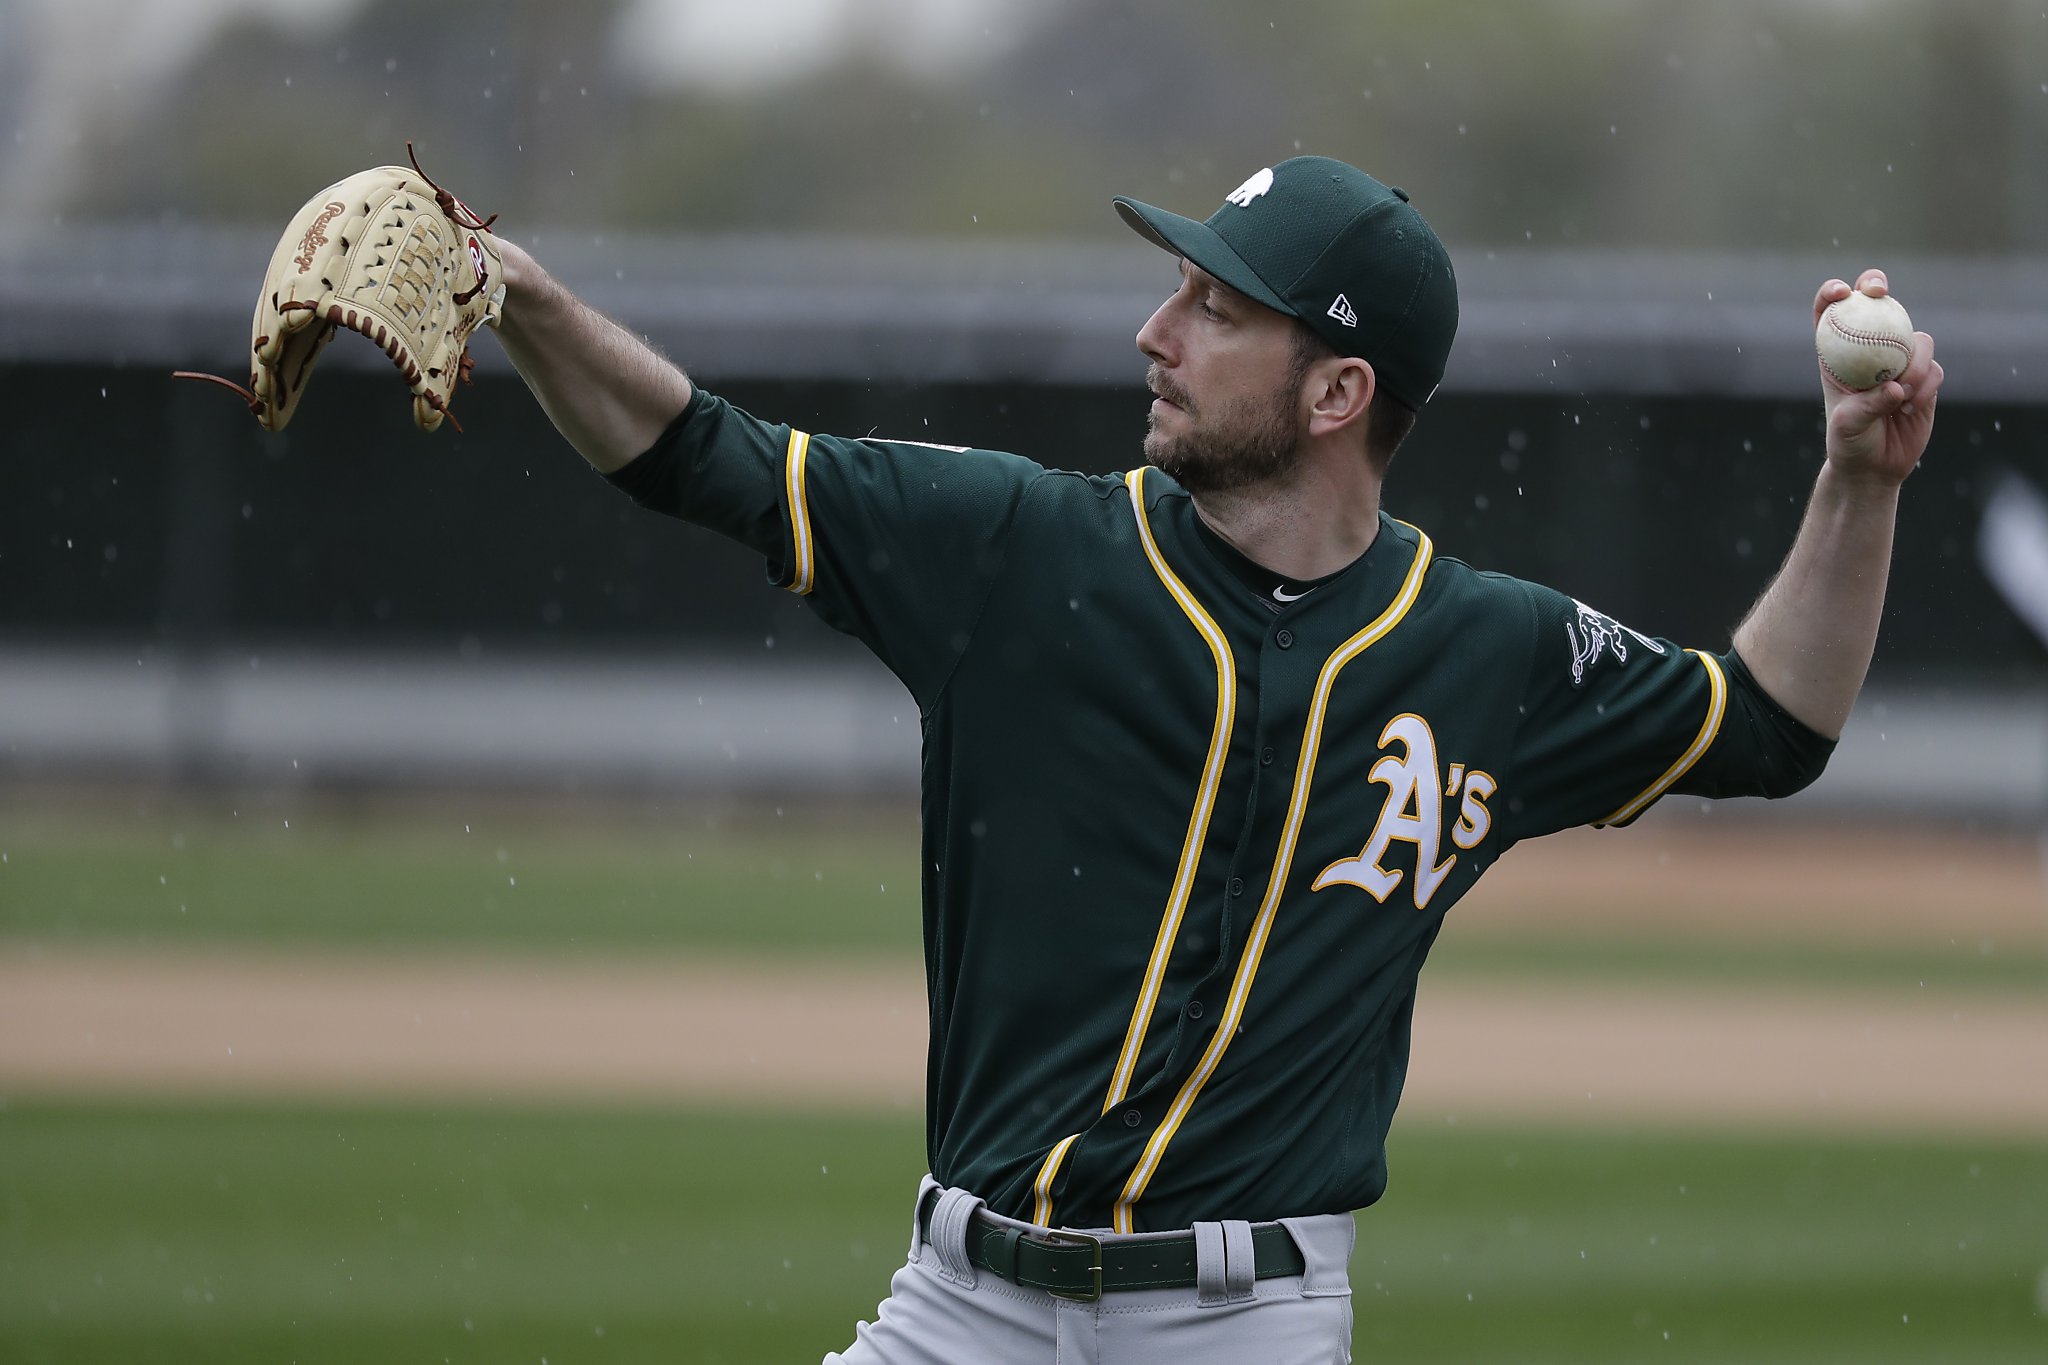 A's will have to decide soon on Blevins, Hundley